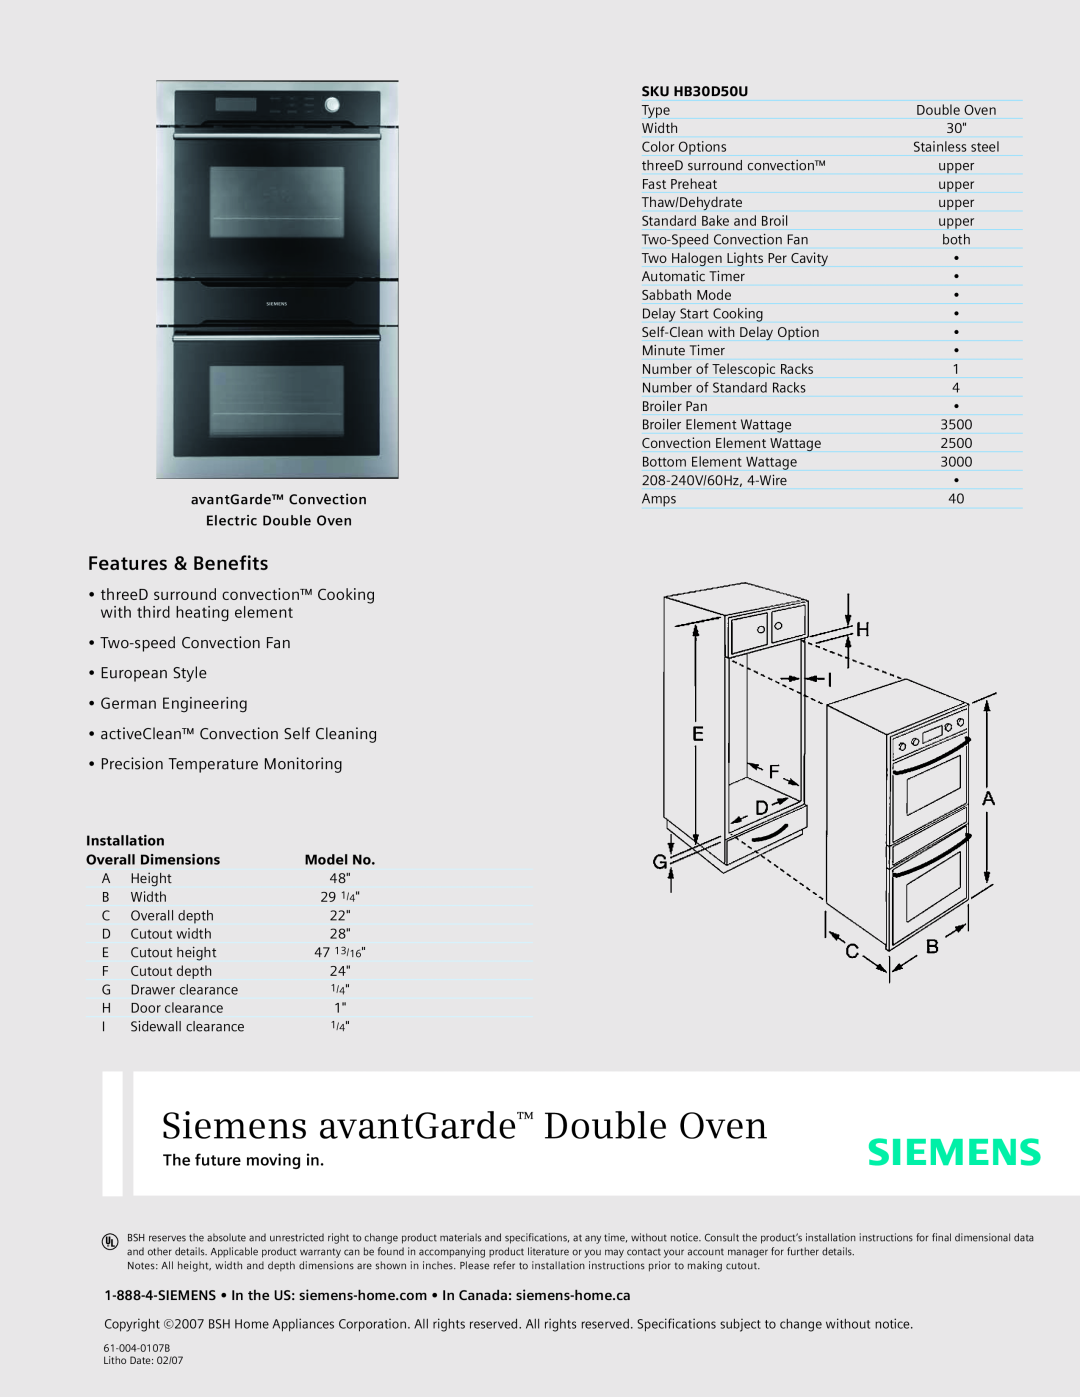 Siemens SKU HB30D50U dimensions Siemens avantGarde Double Oven, Features & Benefits, The future moving in, Installation 